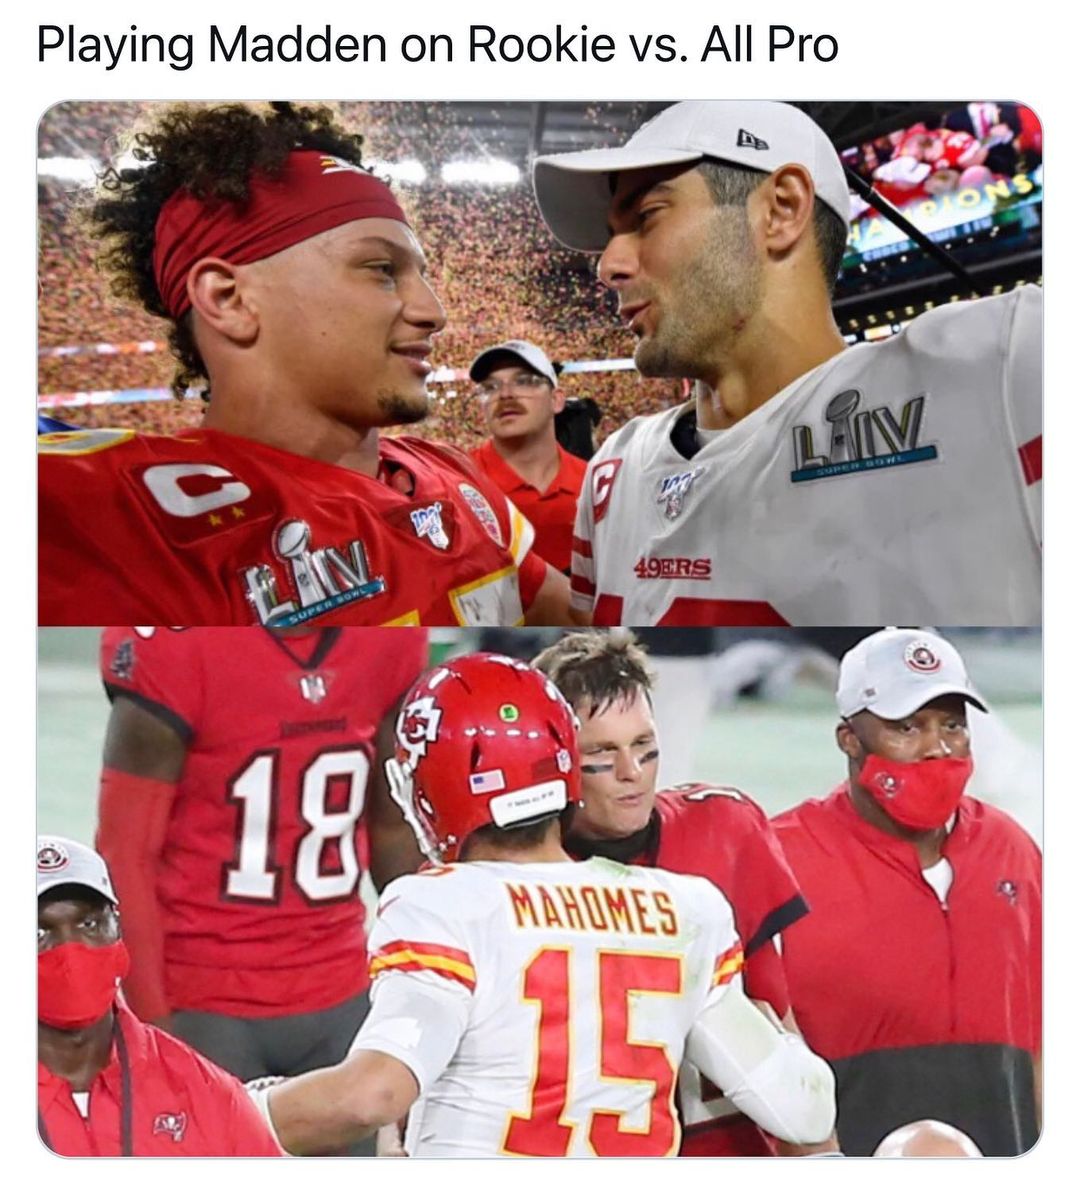 patrick mahomes and jimmy garoppolo - Playing Madden on Rookie vs. All Pro Pions Liv G in 49ERS Ein Super Bowl 167 18 Mahomes 15